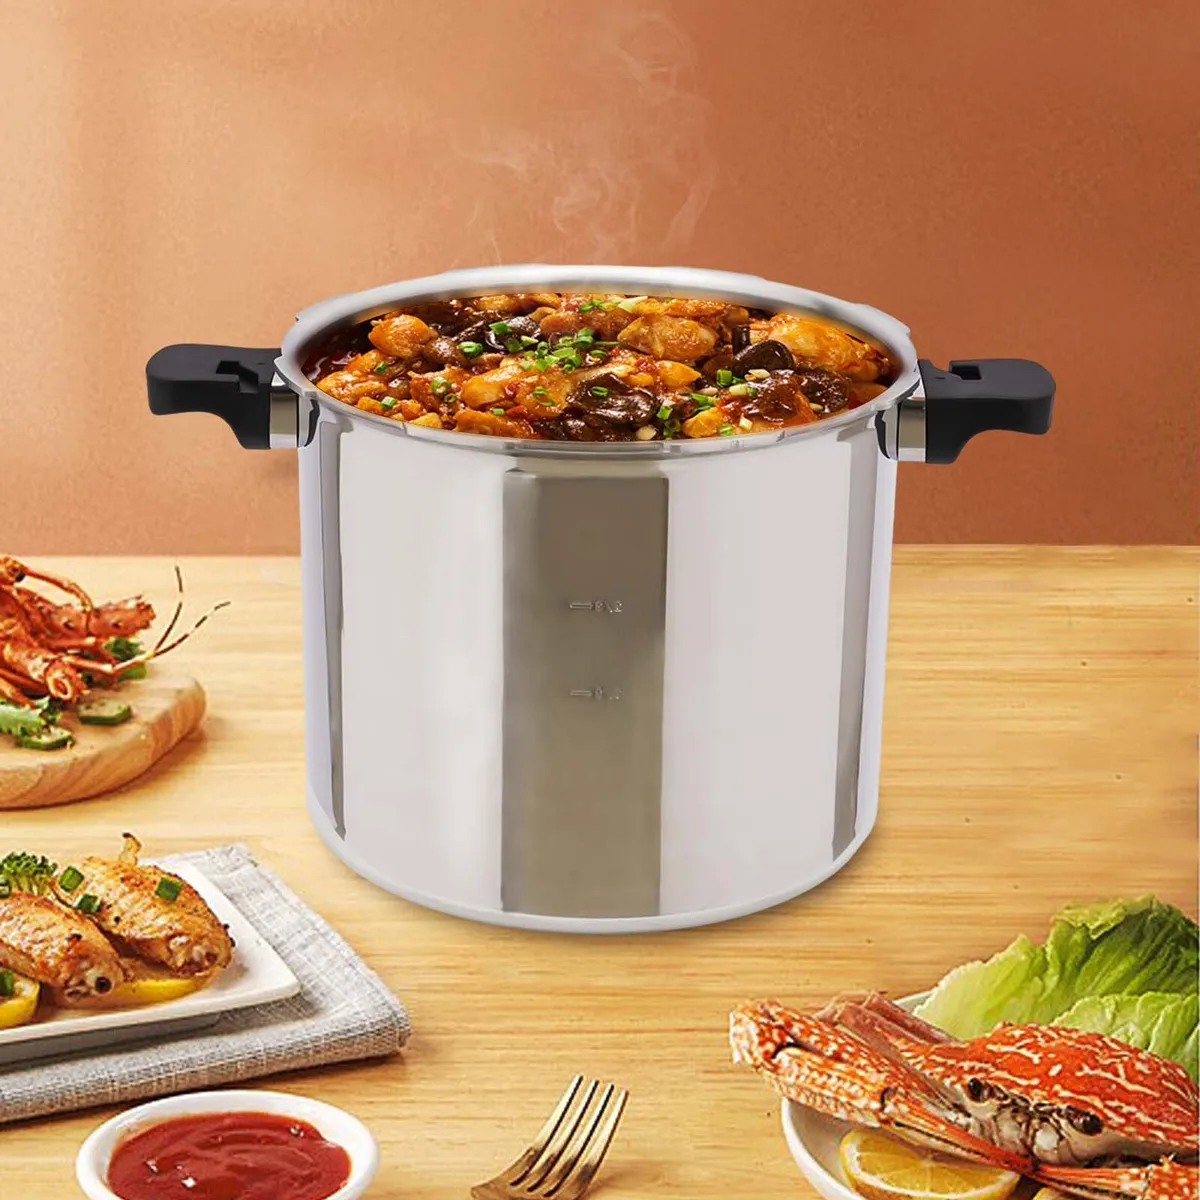 what-is-the-largest-capacity-electric-pressure-cooker-available